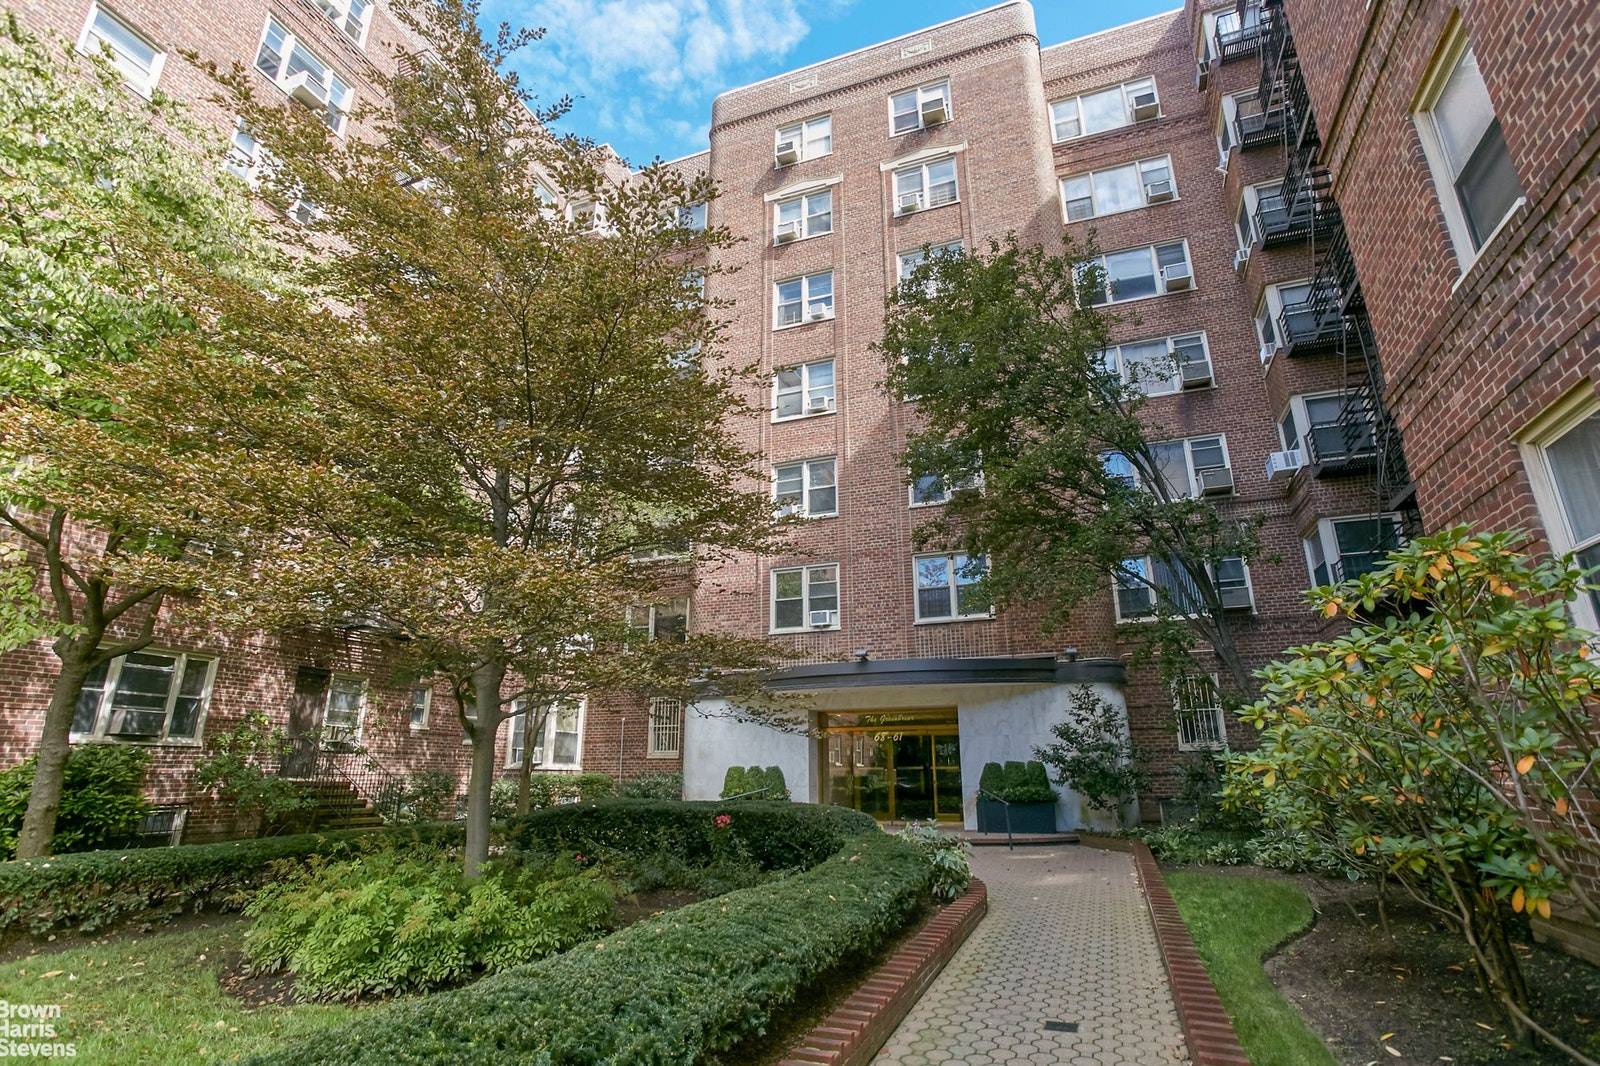 Rarely available full three bedroom, two bath unit with terrace.